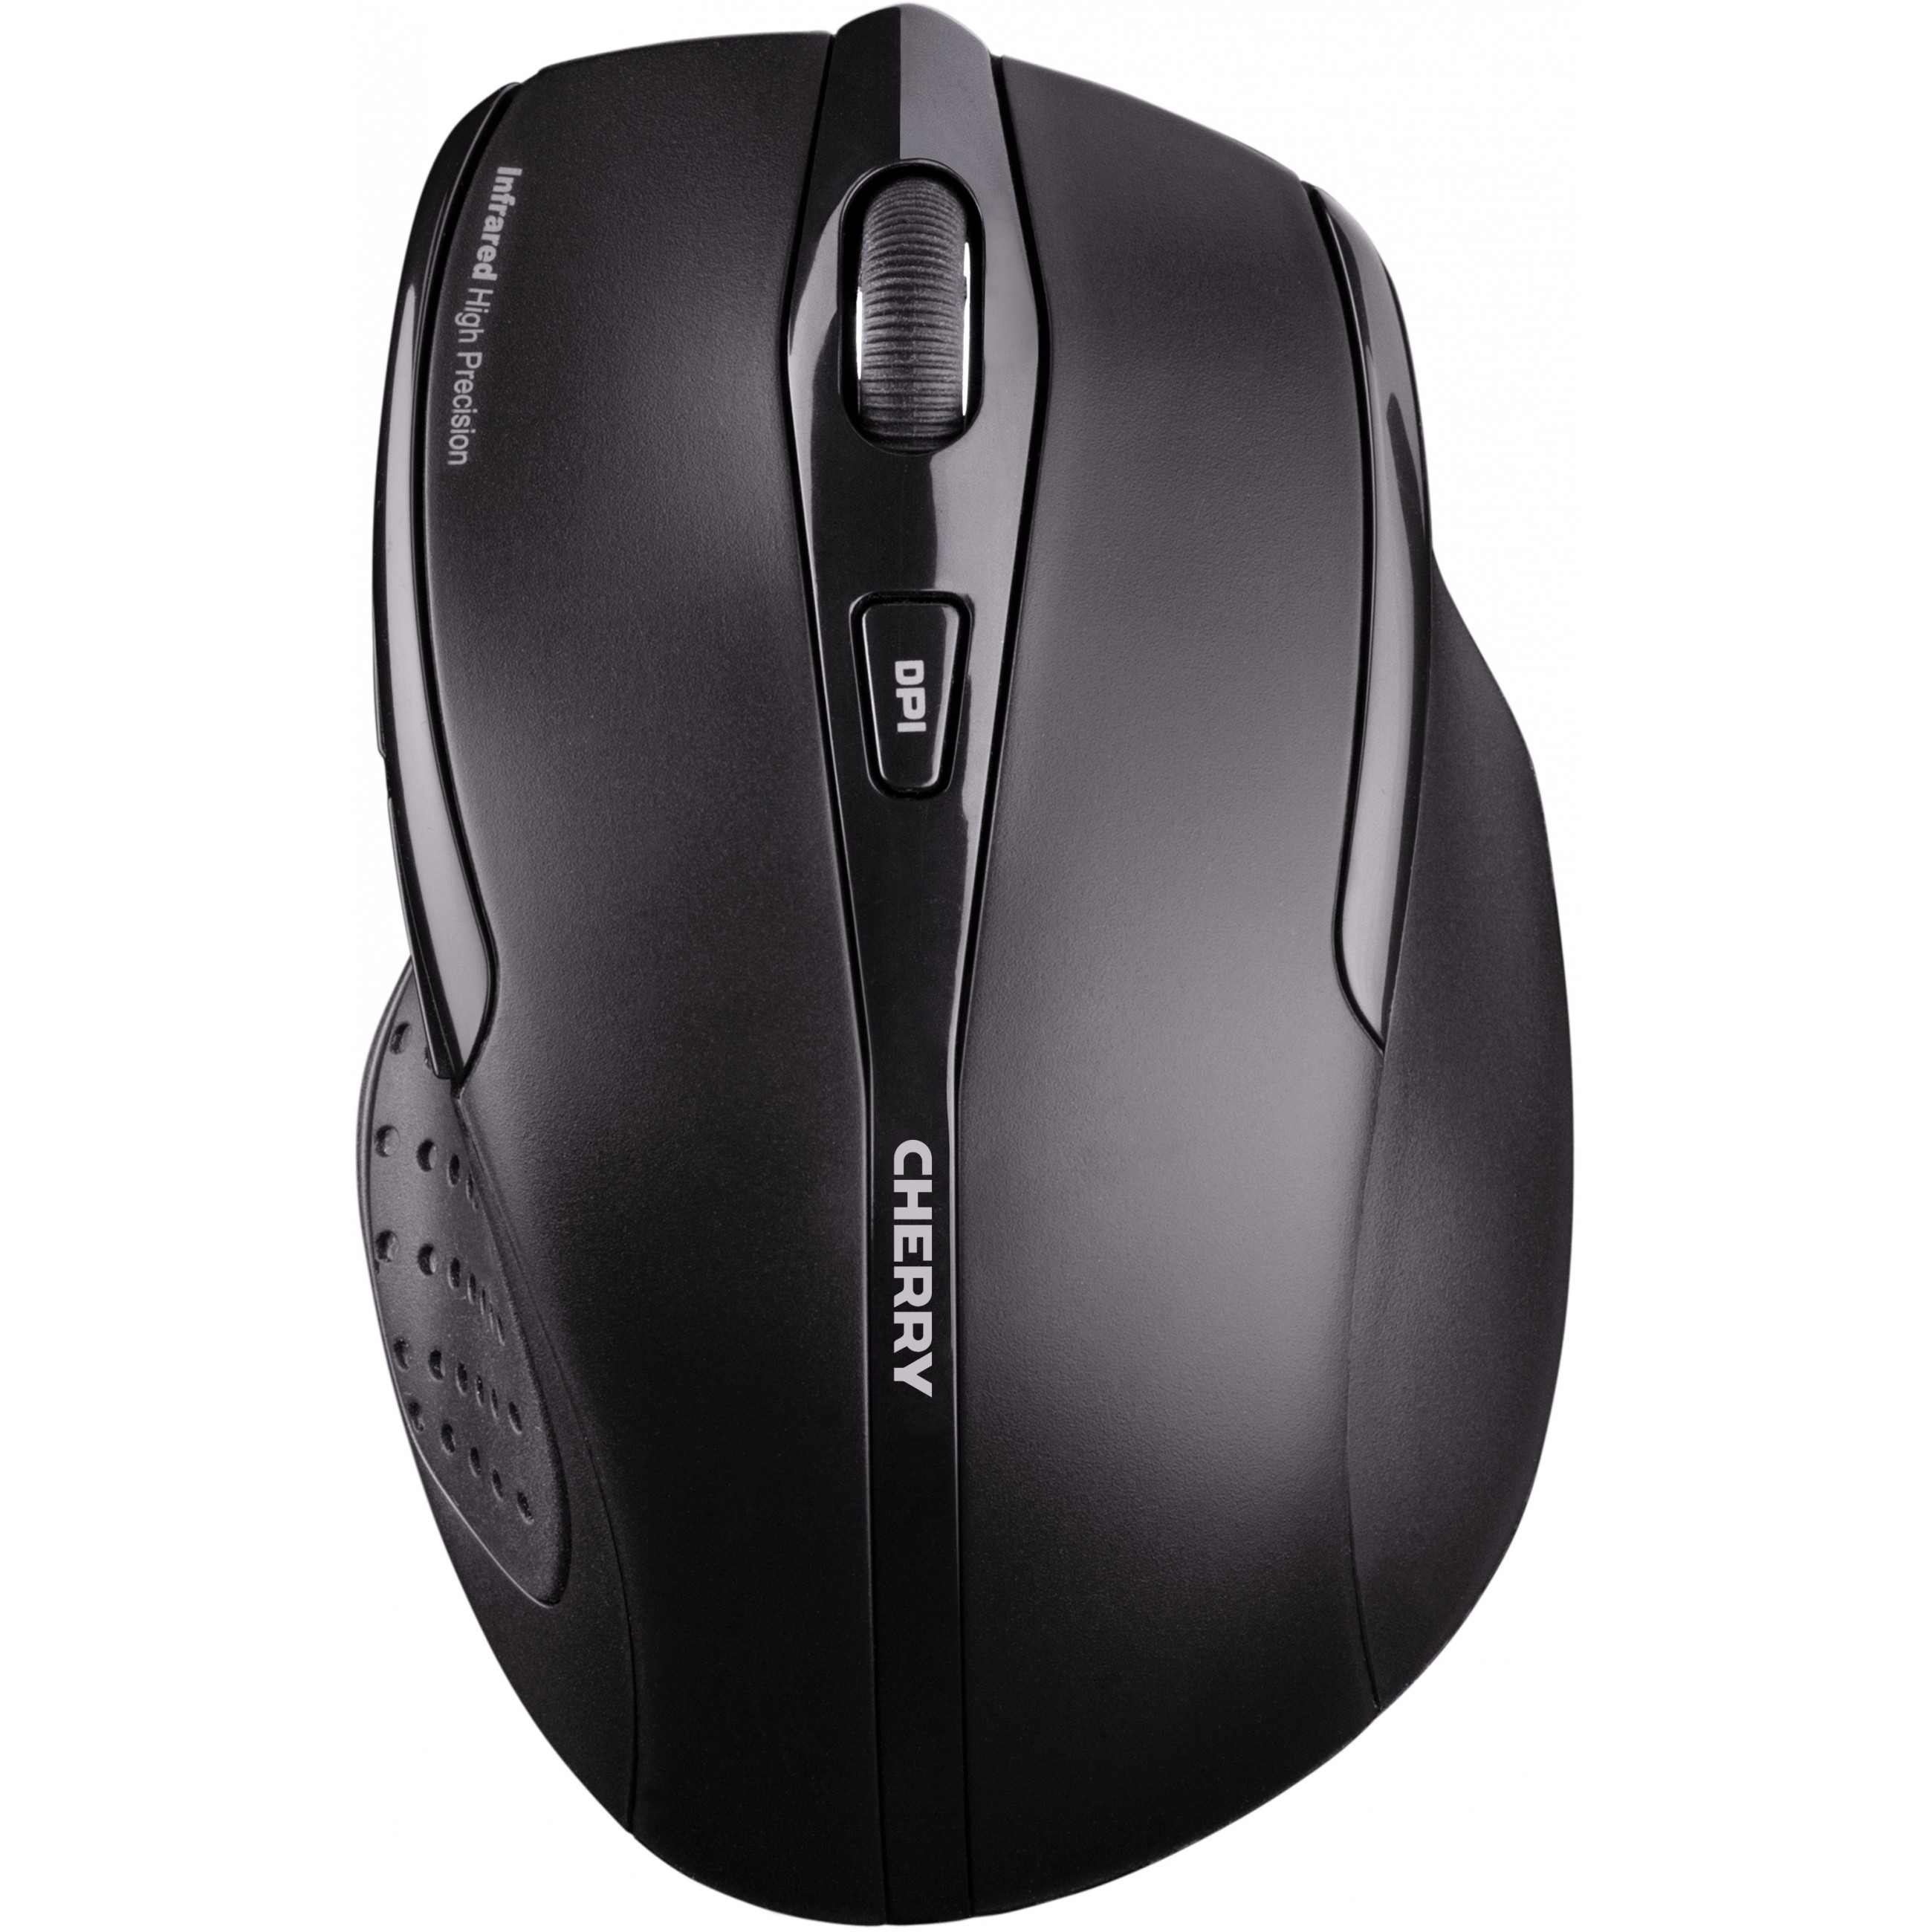 CHERRY MW 3000 mouse